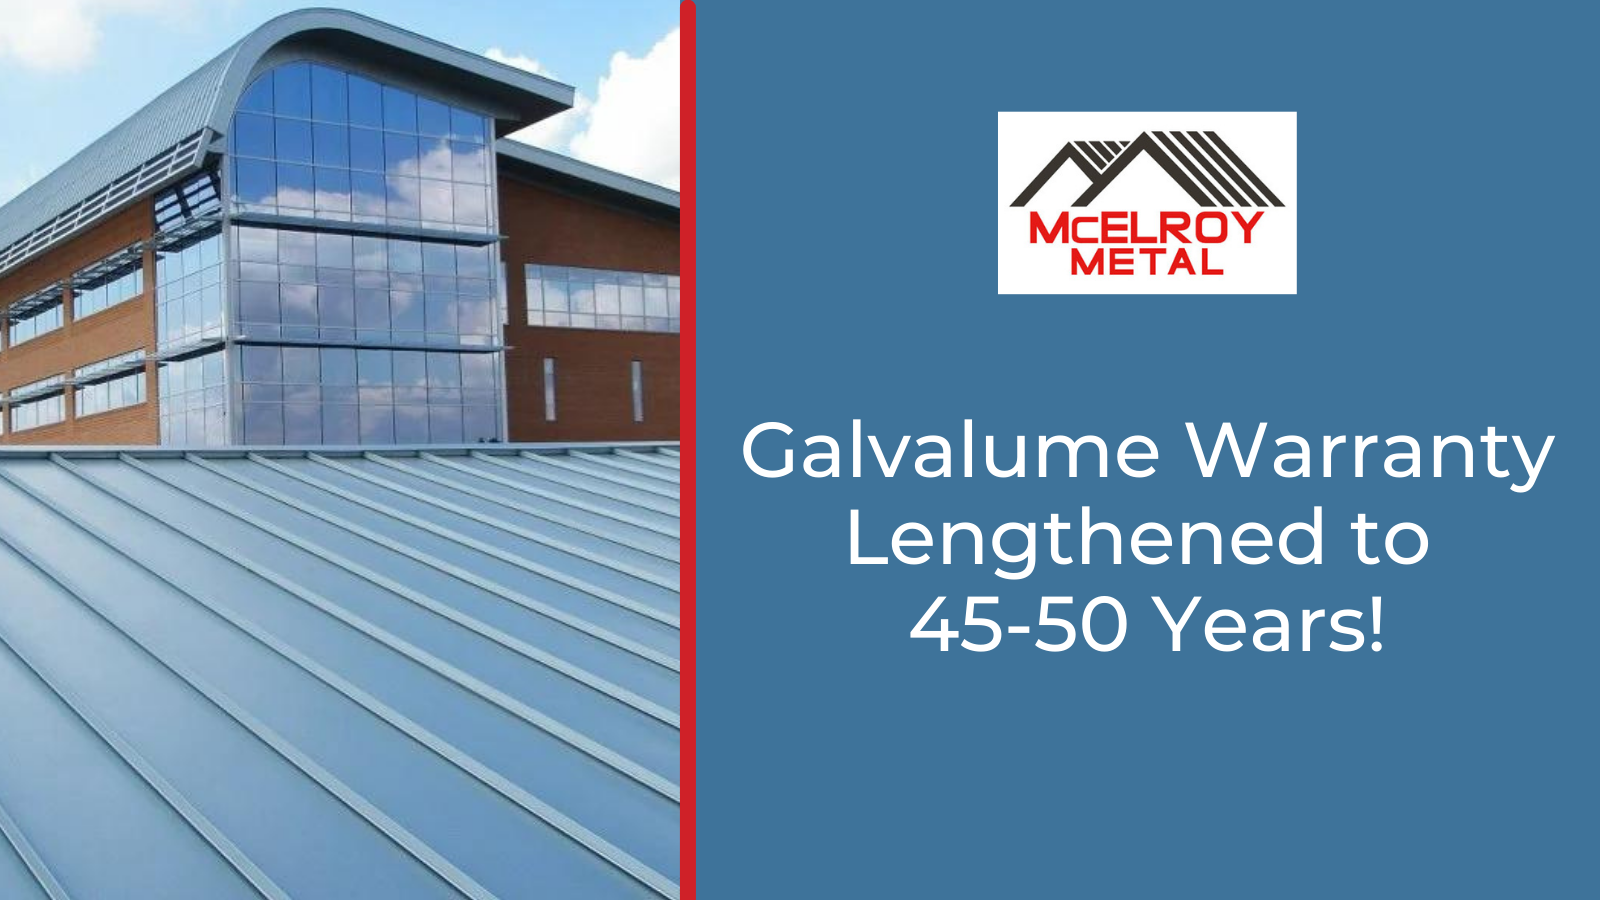 Galvalume Warranty Lengthened to 45-50 Years!